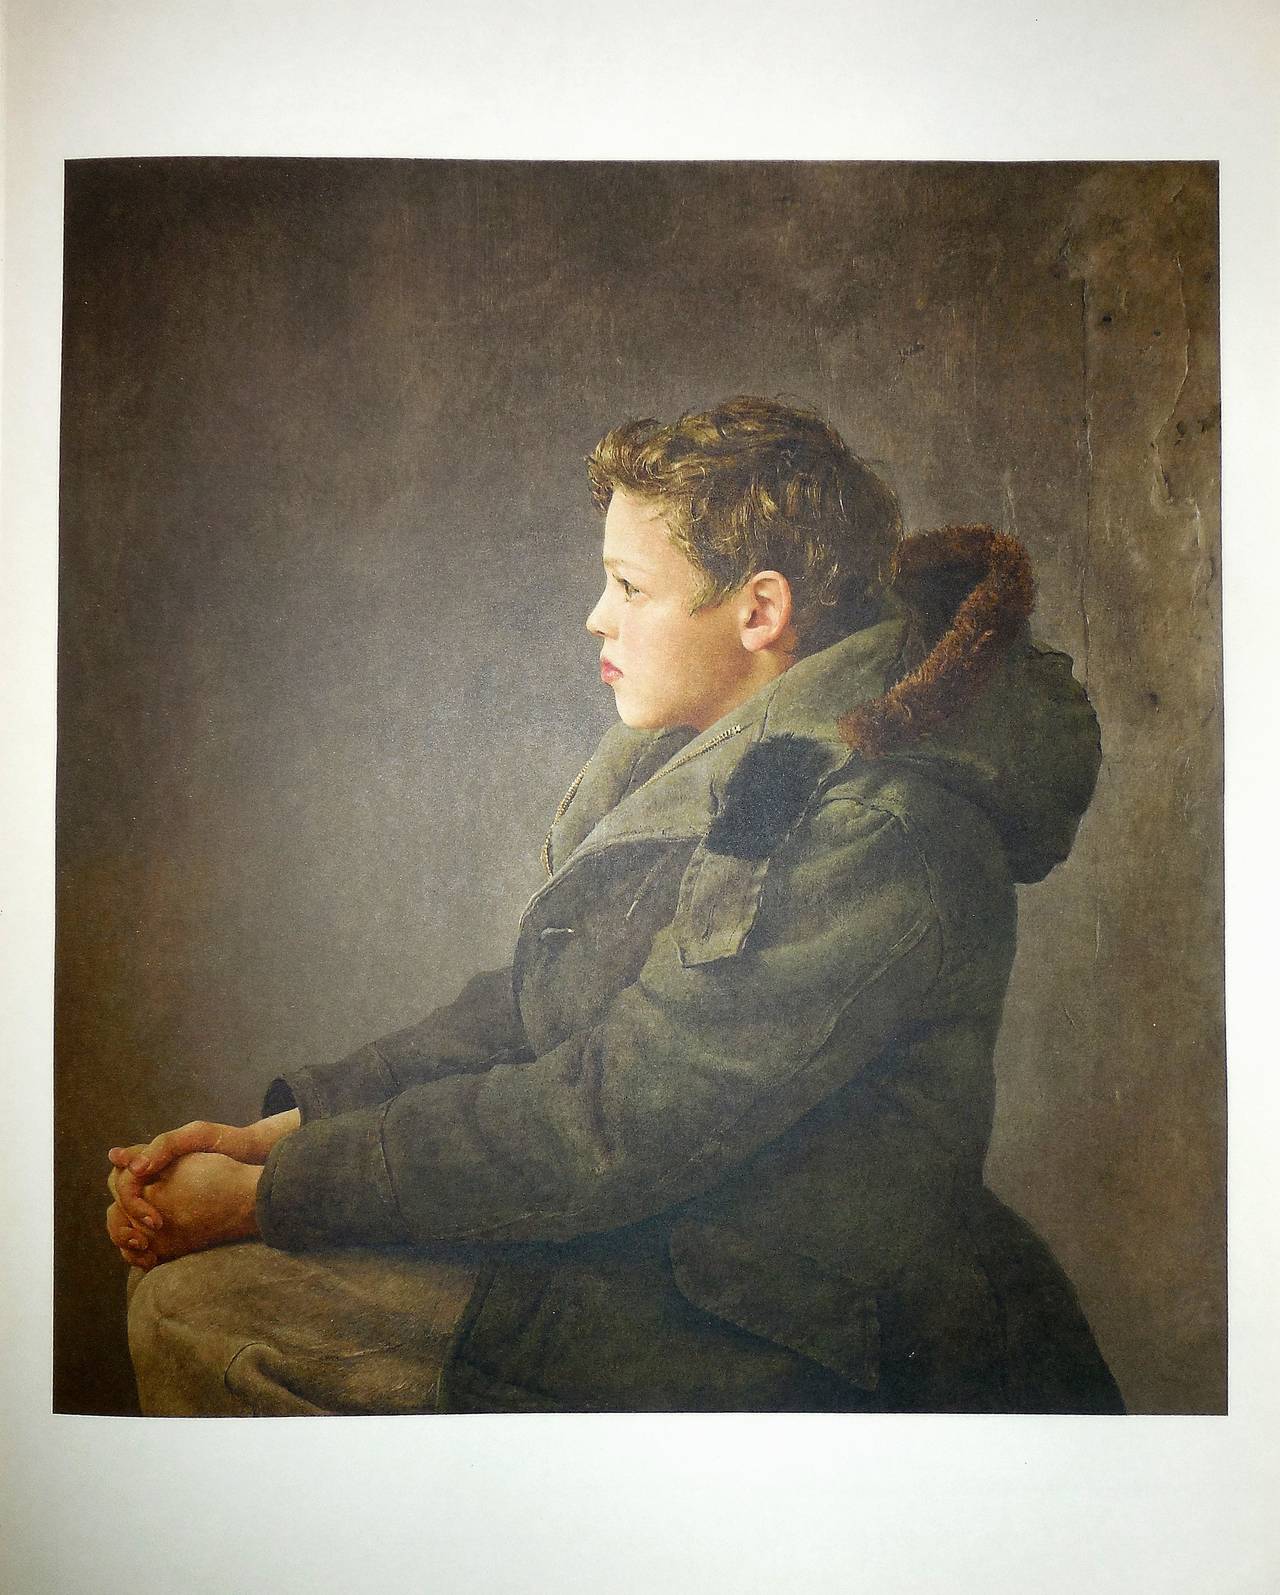 (after) Andrew Wyeth Figurative Print - Rare "Nicholas" 1956 Collotype